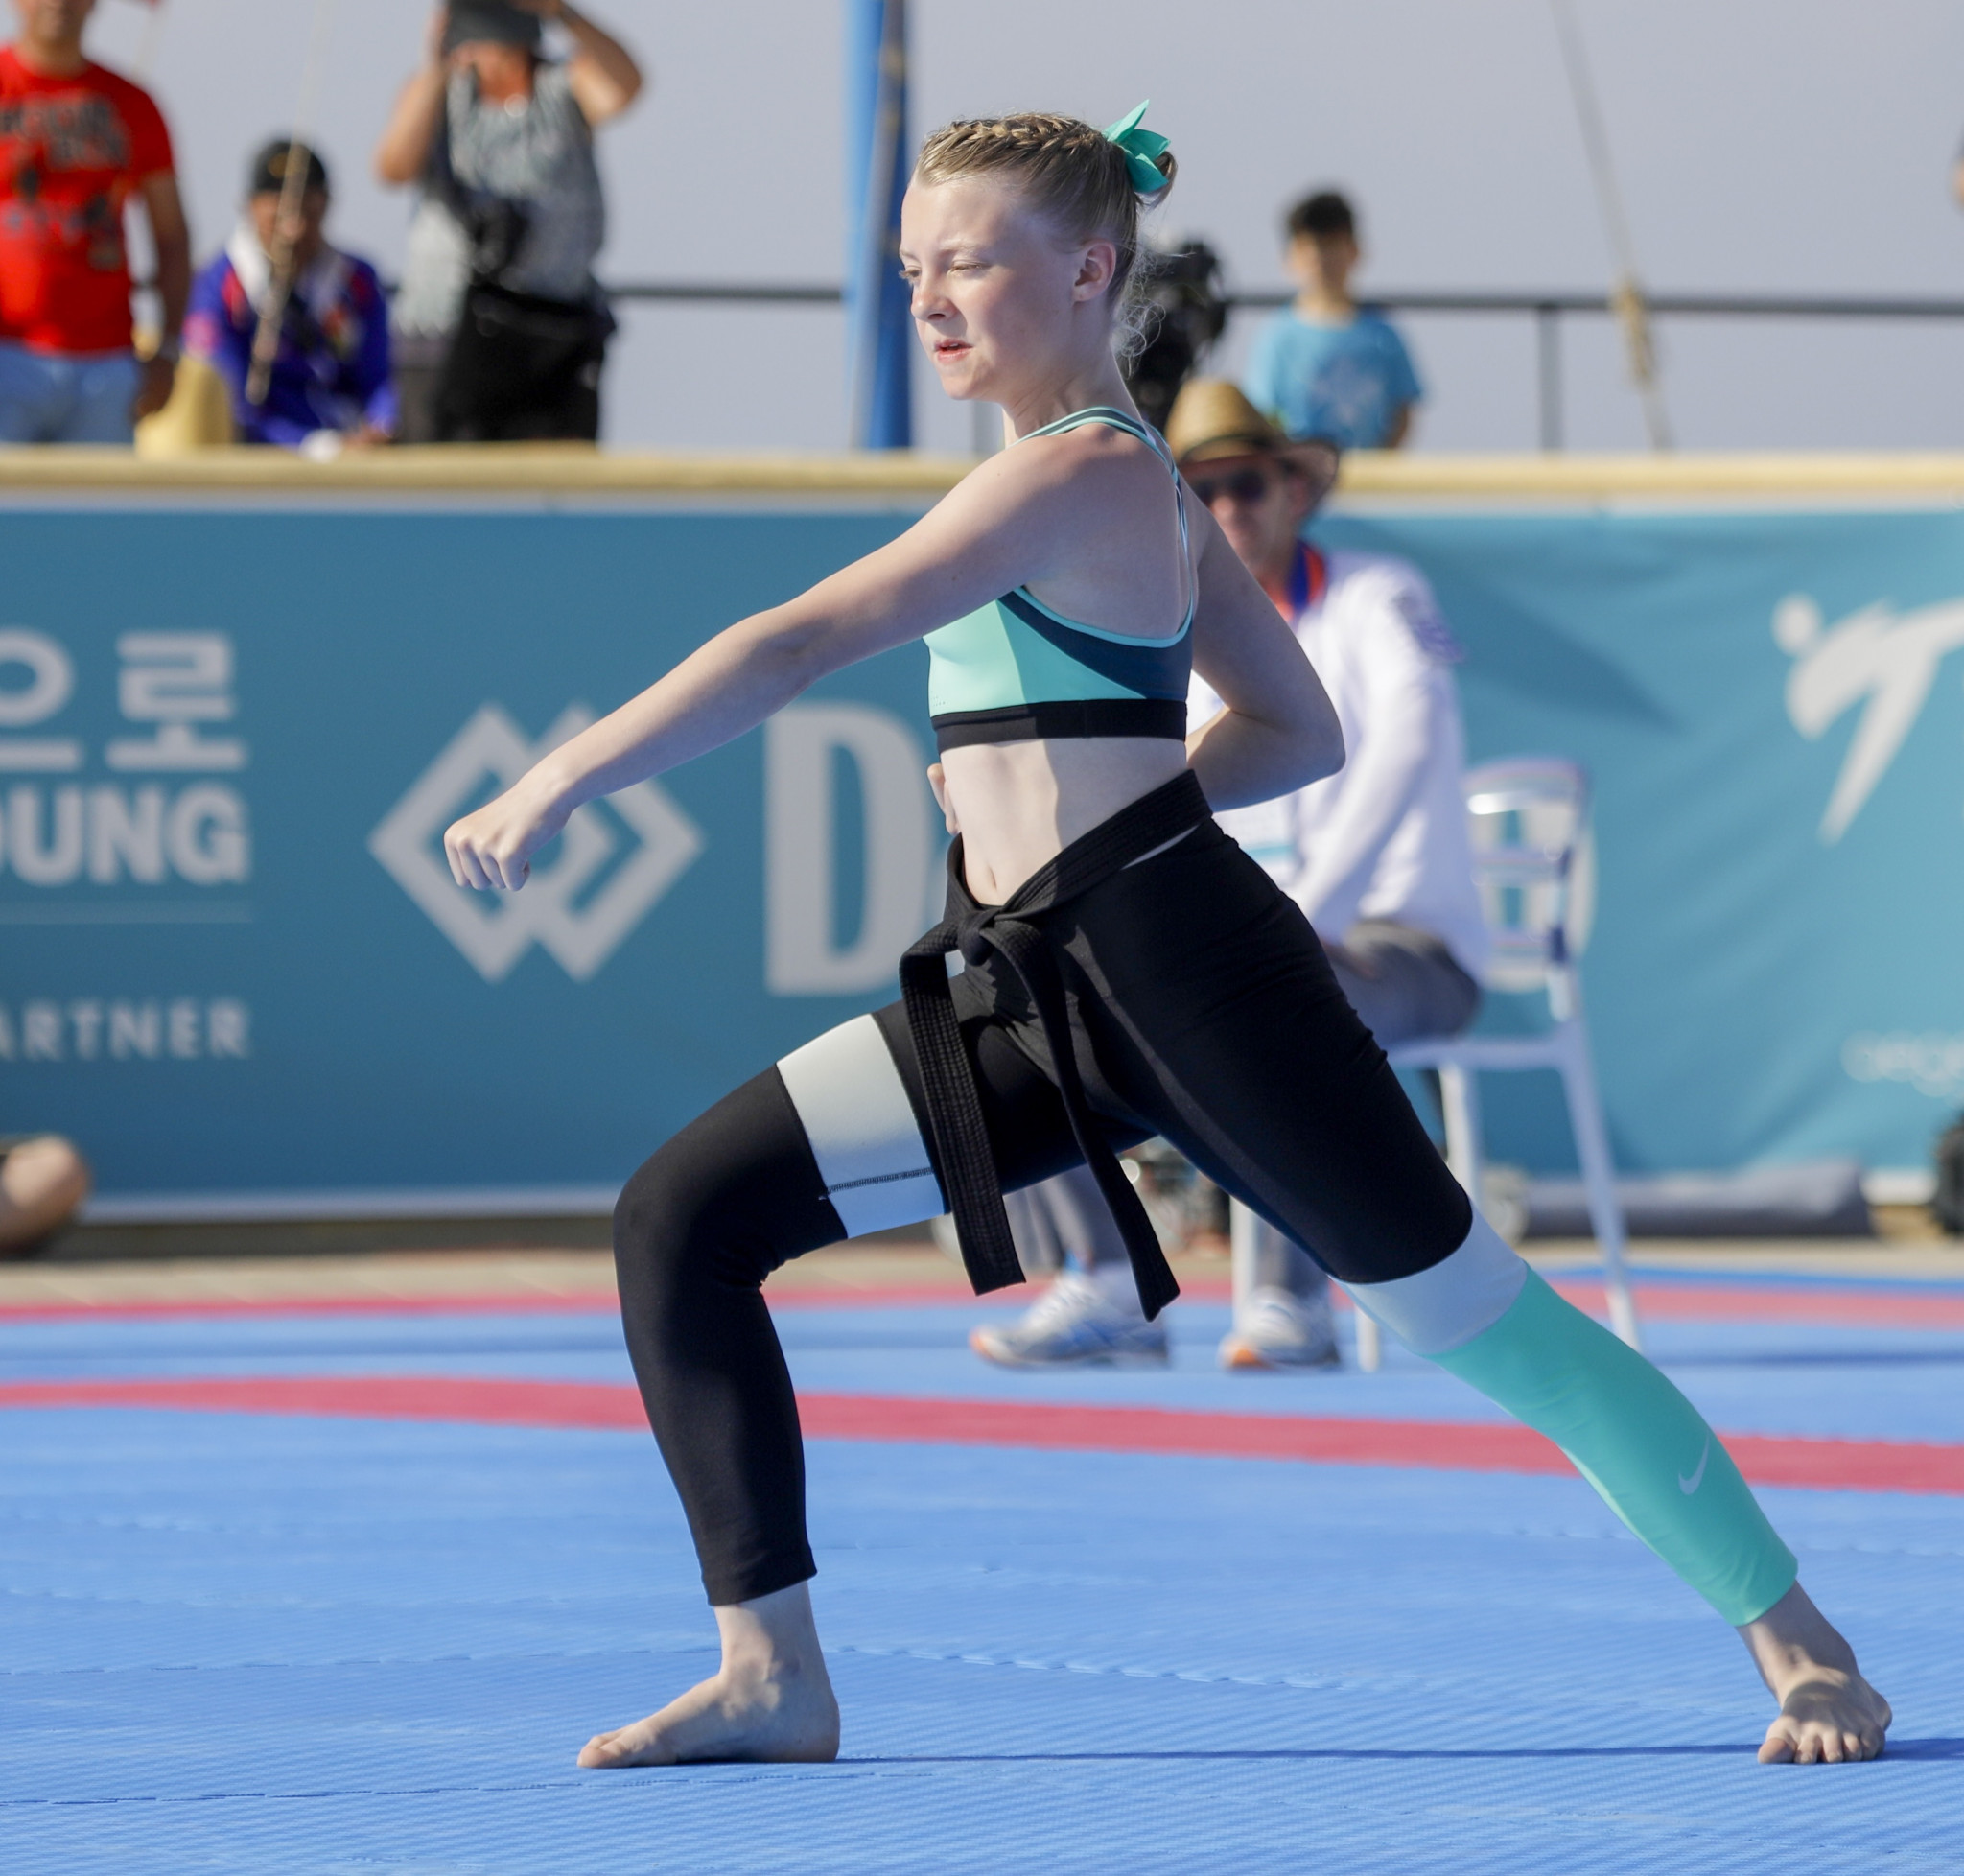 The poomsae discipline in taekwondo is ideally adaptable to conforming with social distancing and safe competition, World Taekwondo maintains ©Getty Images